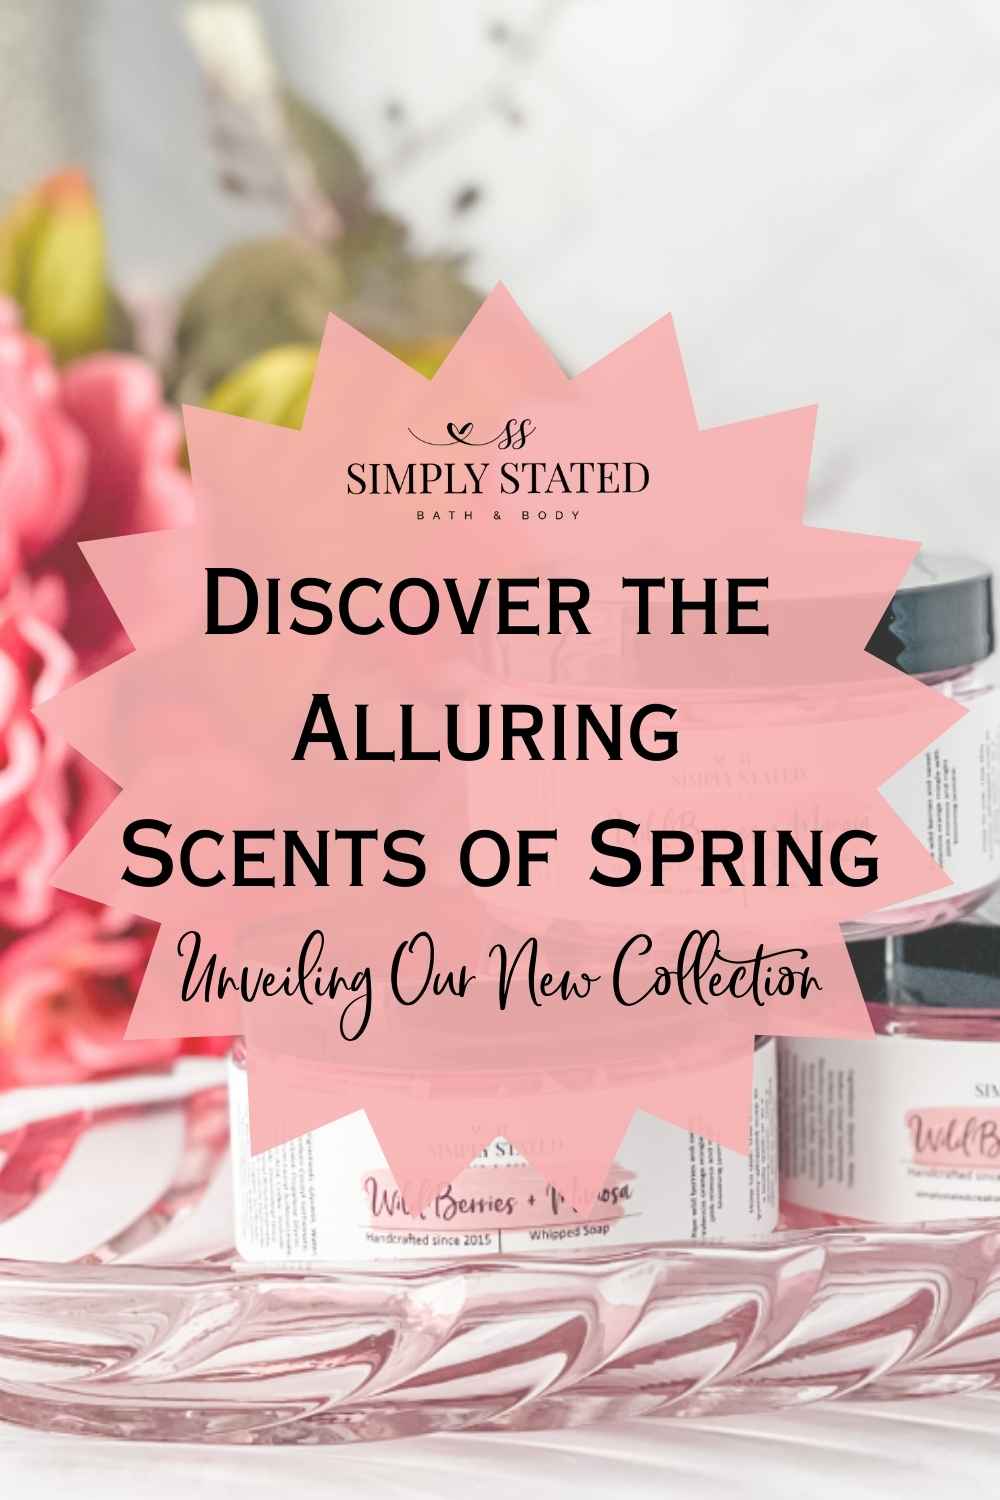 Discover the Alluring Scents of Spring: Unveiling Our New Collection